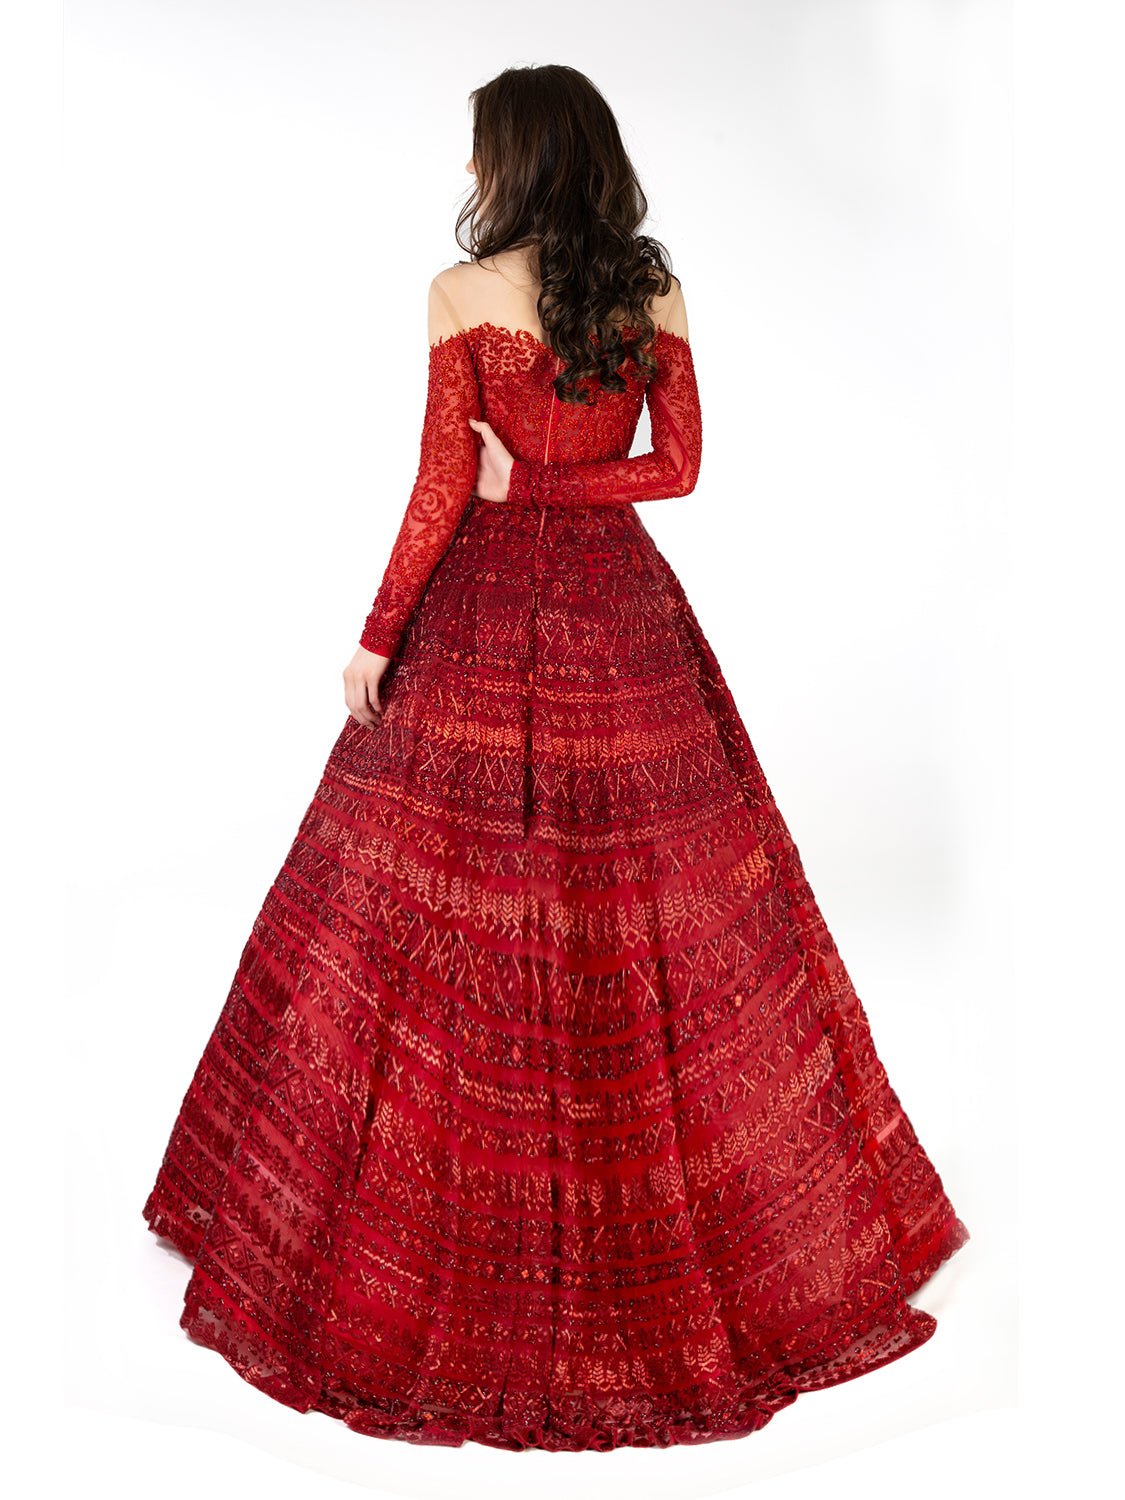 Lal Mahal Gown